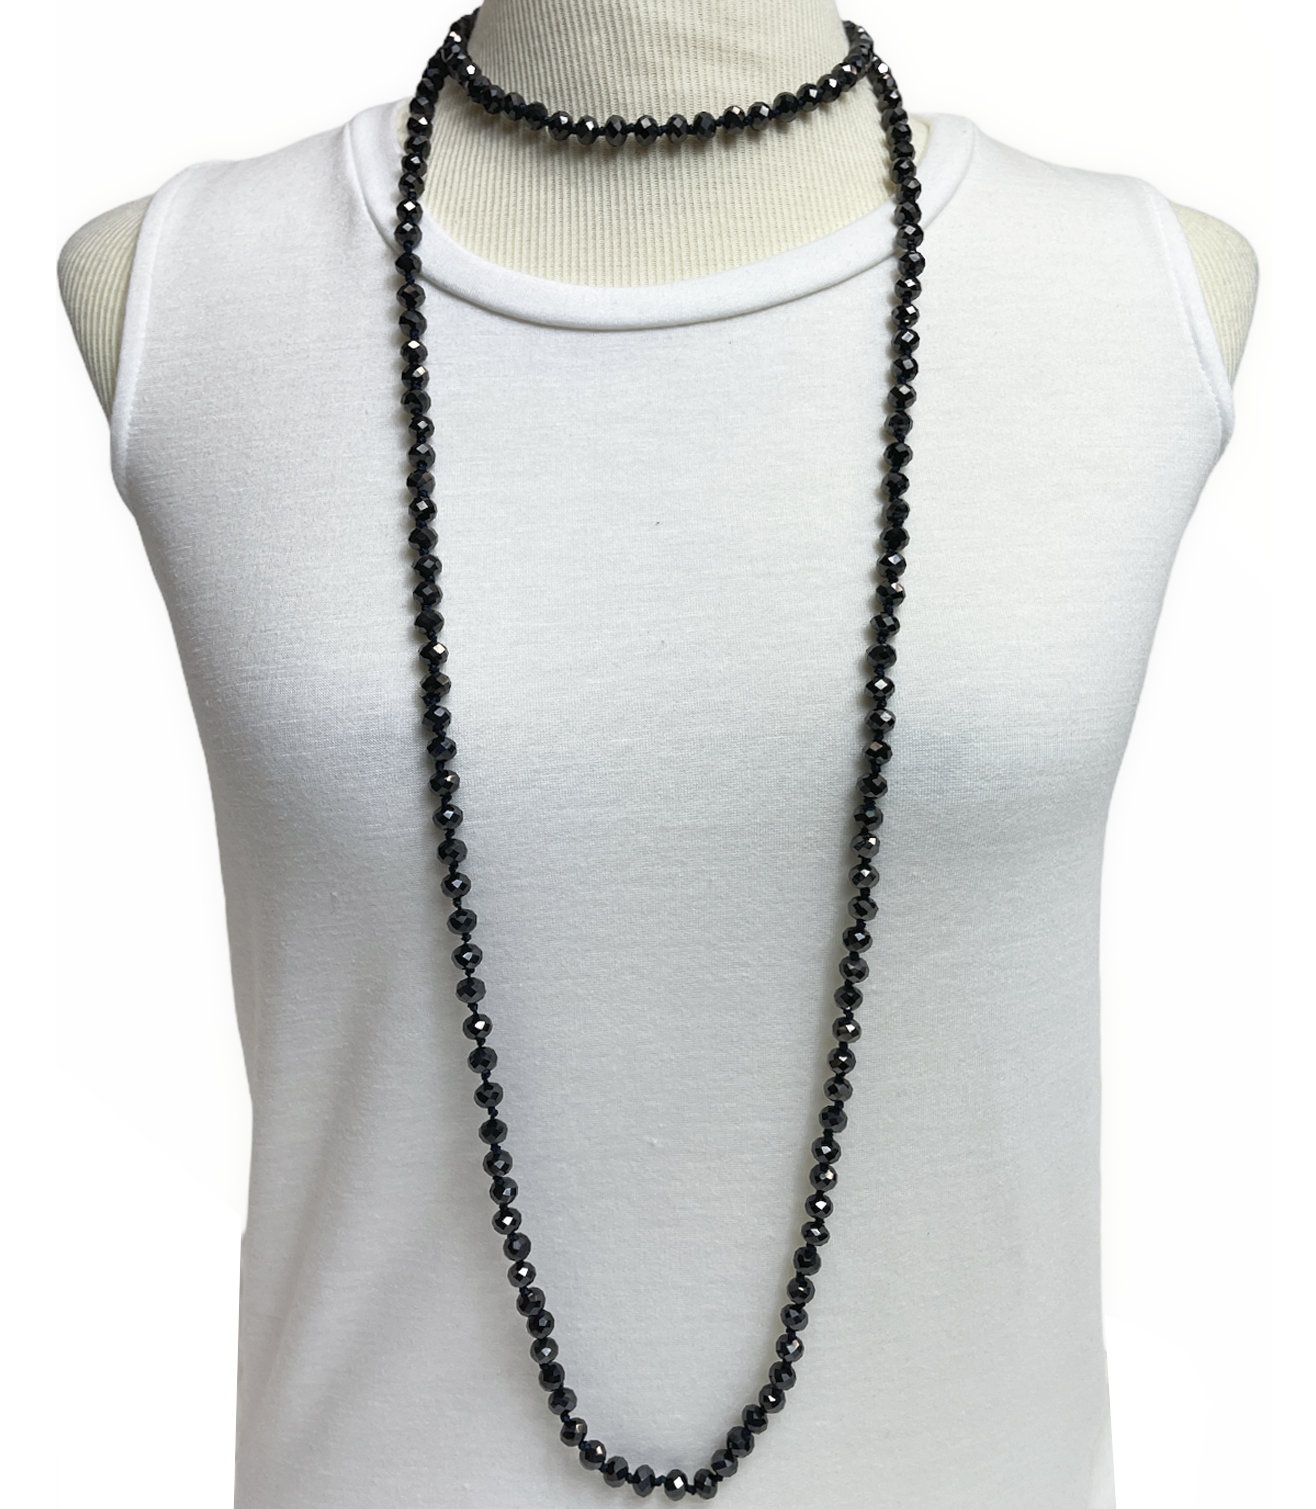 NK-2244 METALLIC BLACK 60 hand knotted glass bead necklace